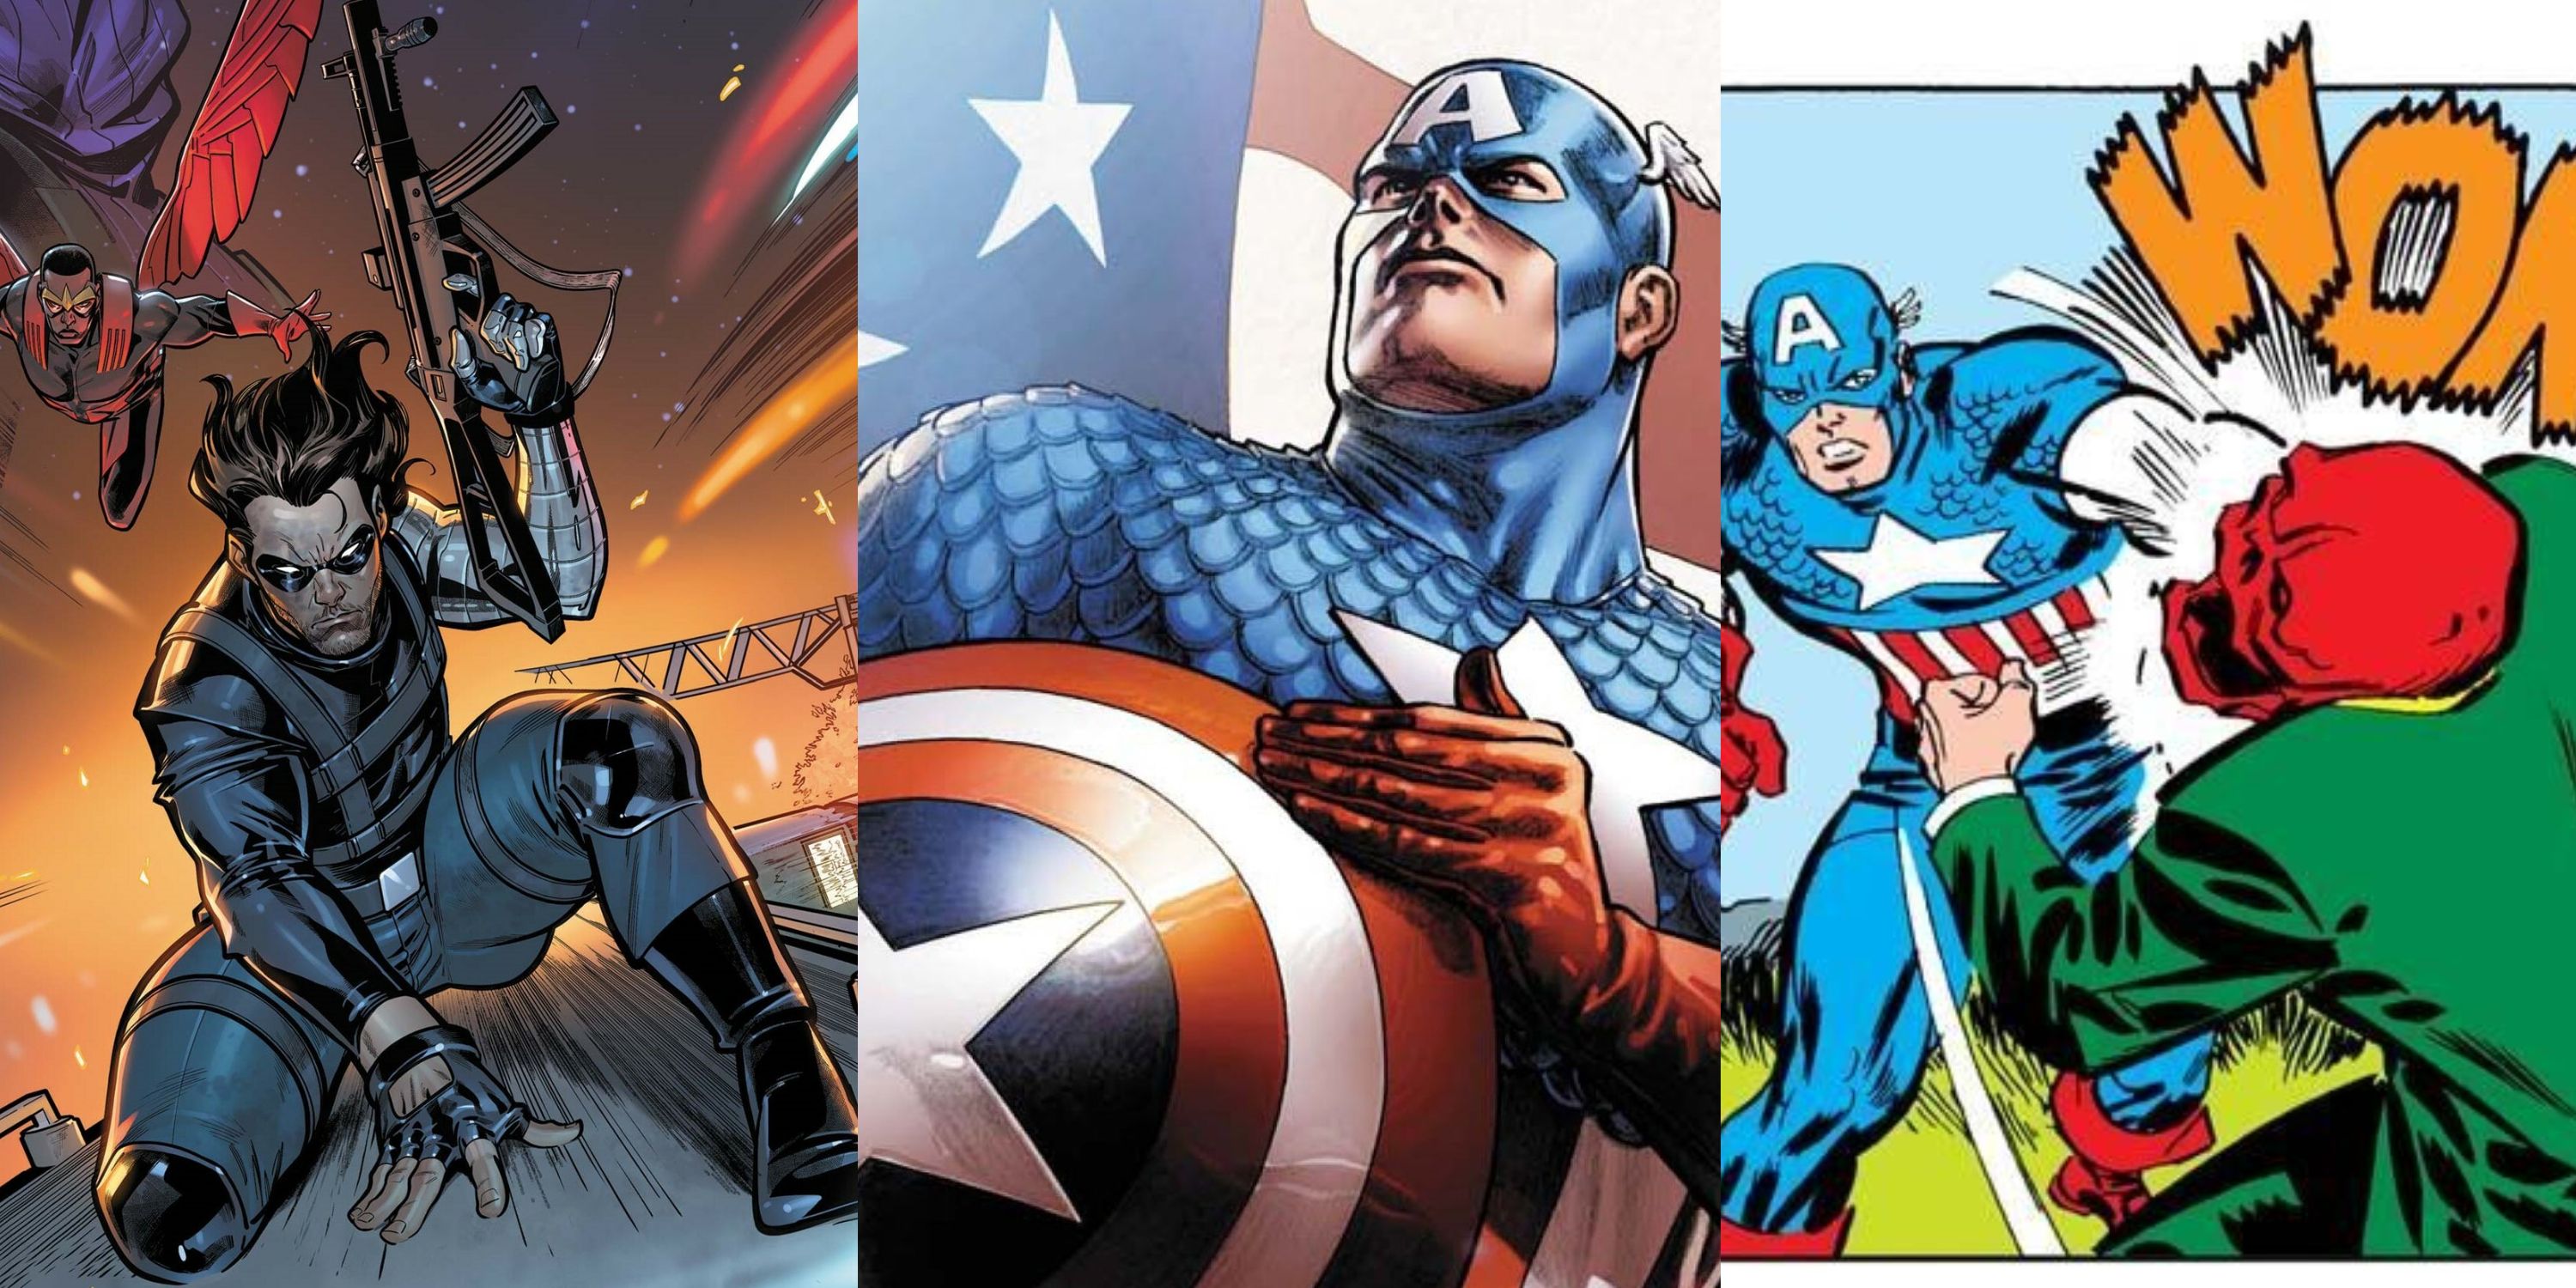 Split image of Falcon and Winter Soldier, Captain America with his shield, and Captain America punching the Red Skull